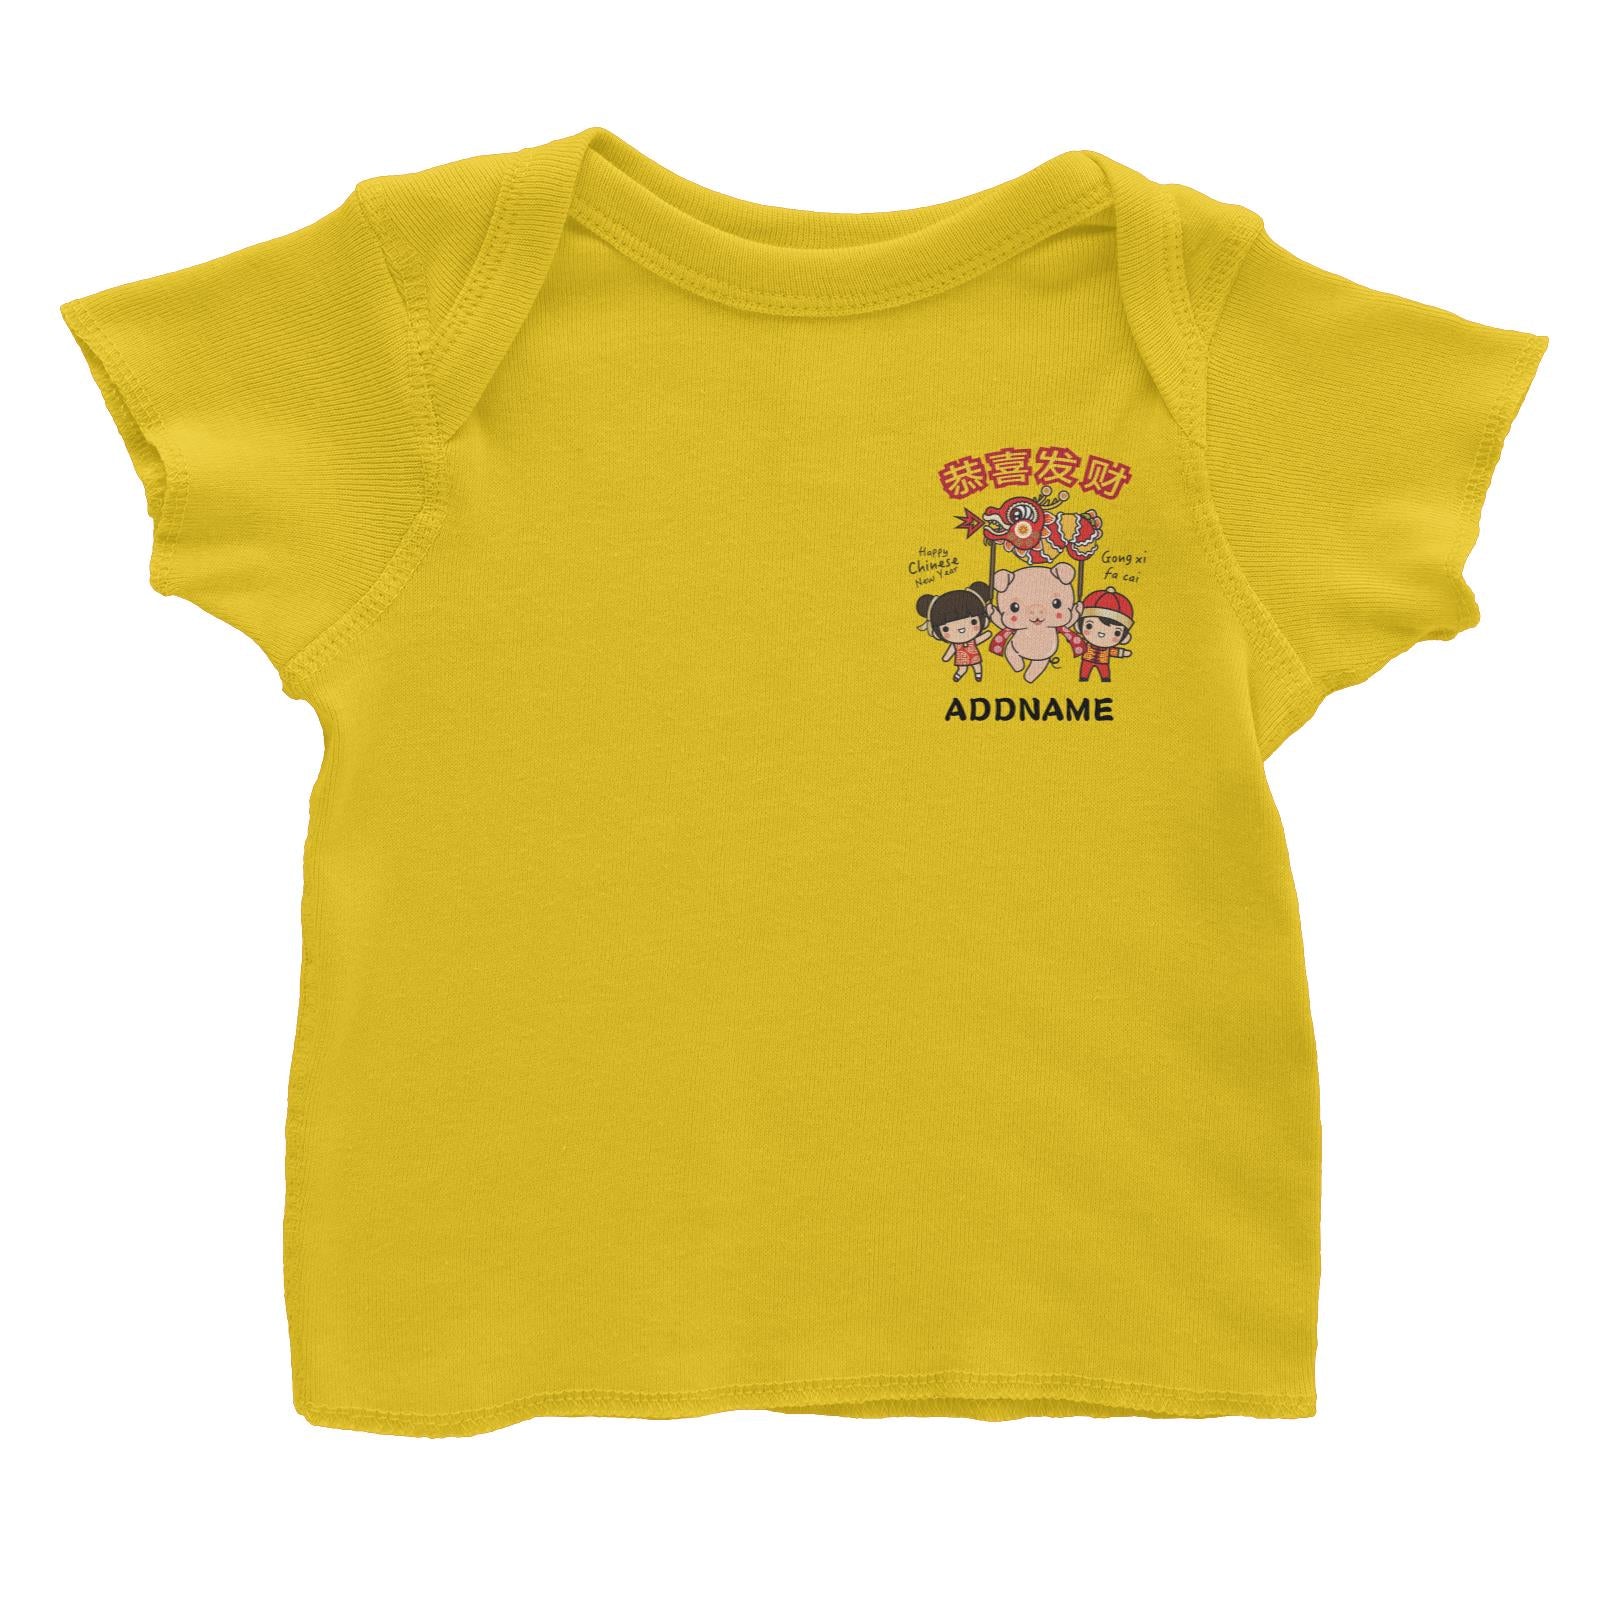 Prosperity Pig Boy, Girl and Baby Pig with Dragon Dance Pocket Design Baby T-Shirt